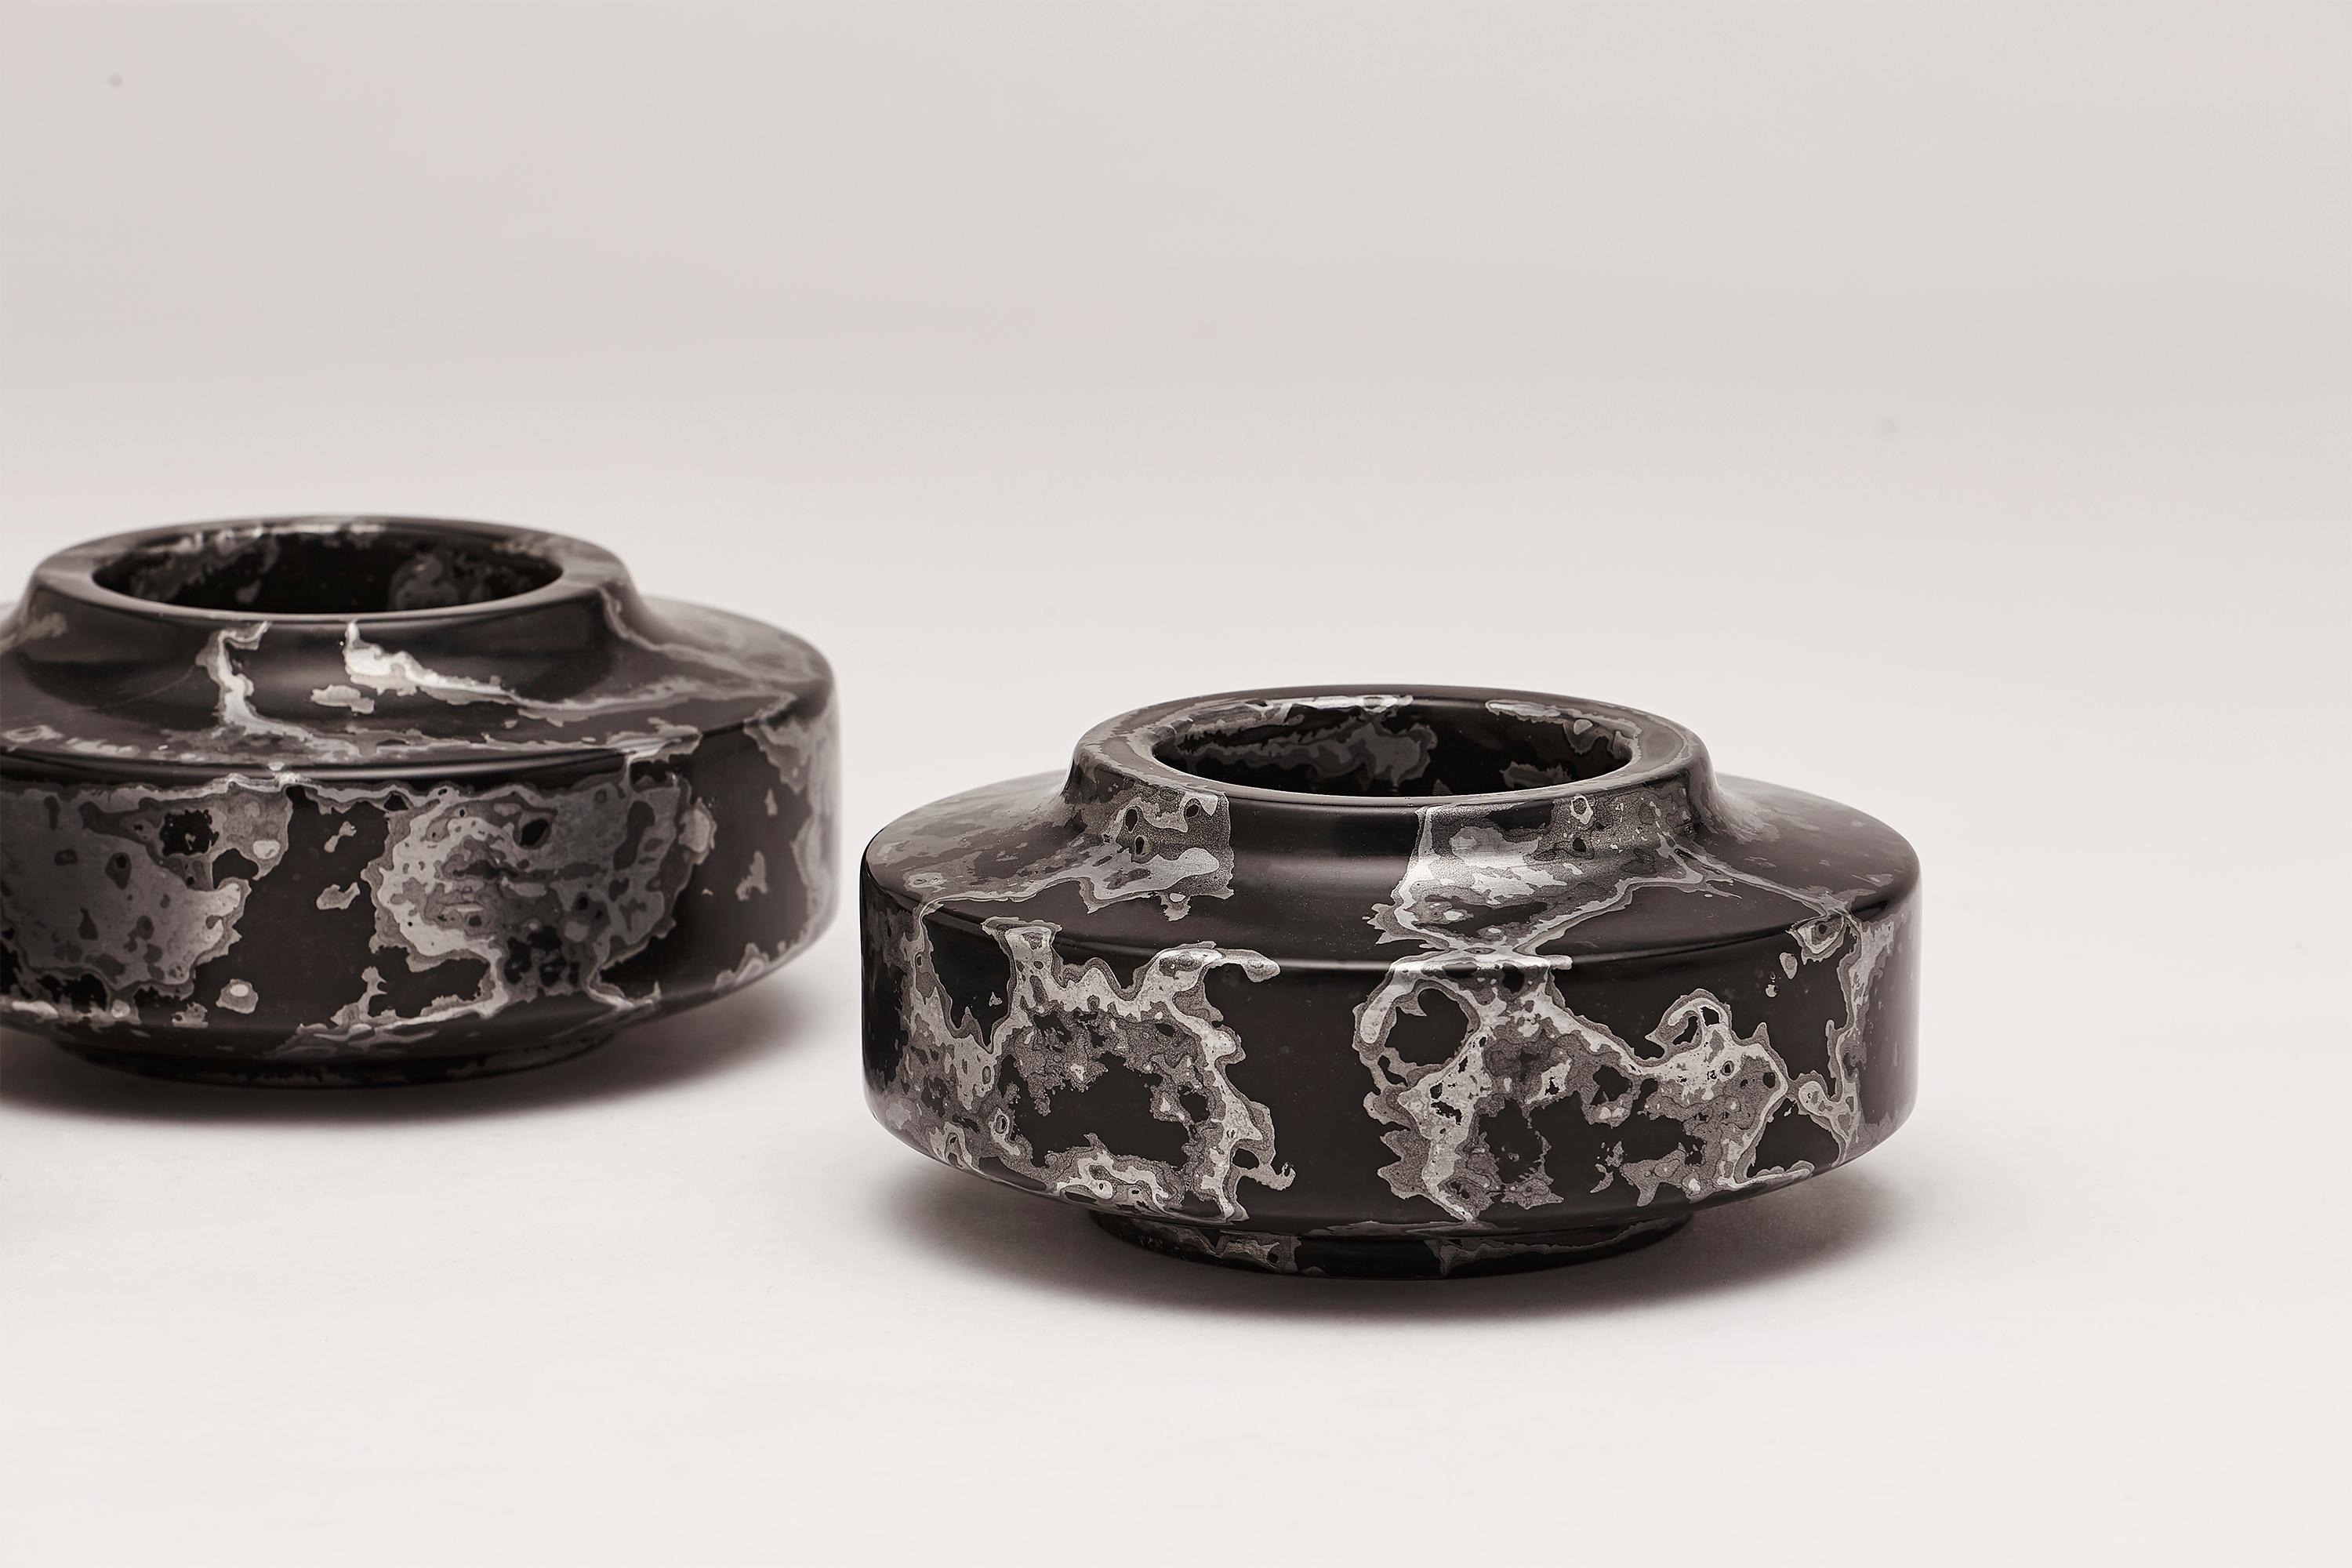 Lacquered Silver Stone, Contemporary Set of Vessels in Black and Silver by Nic Parnell For Sale